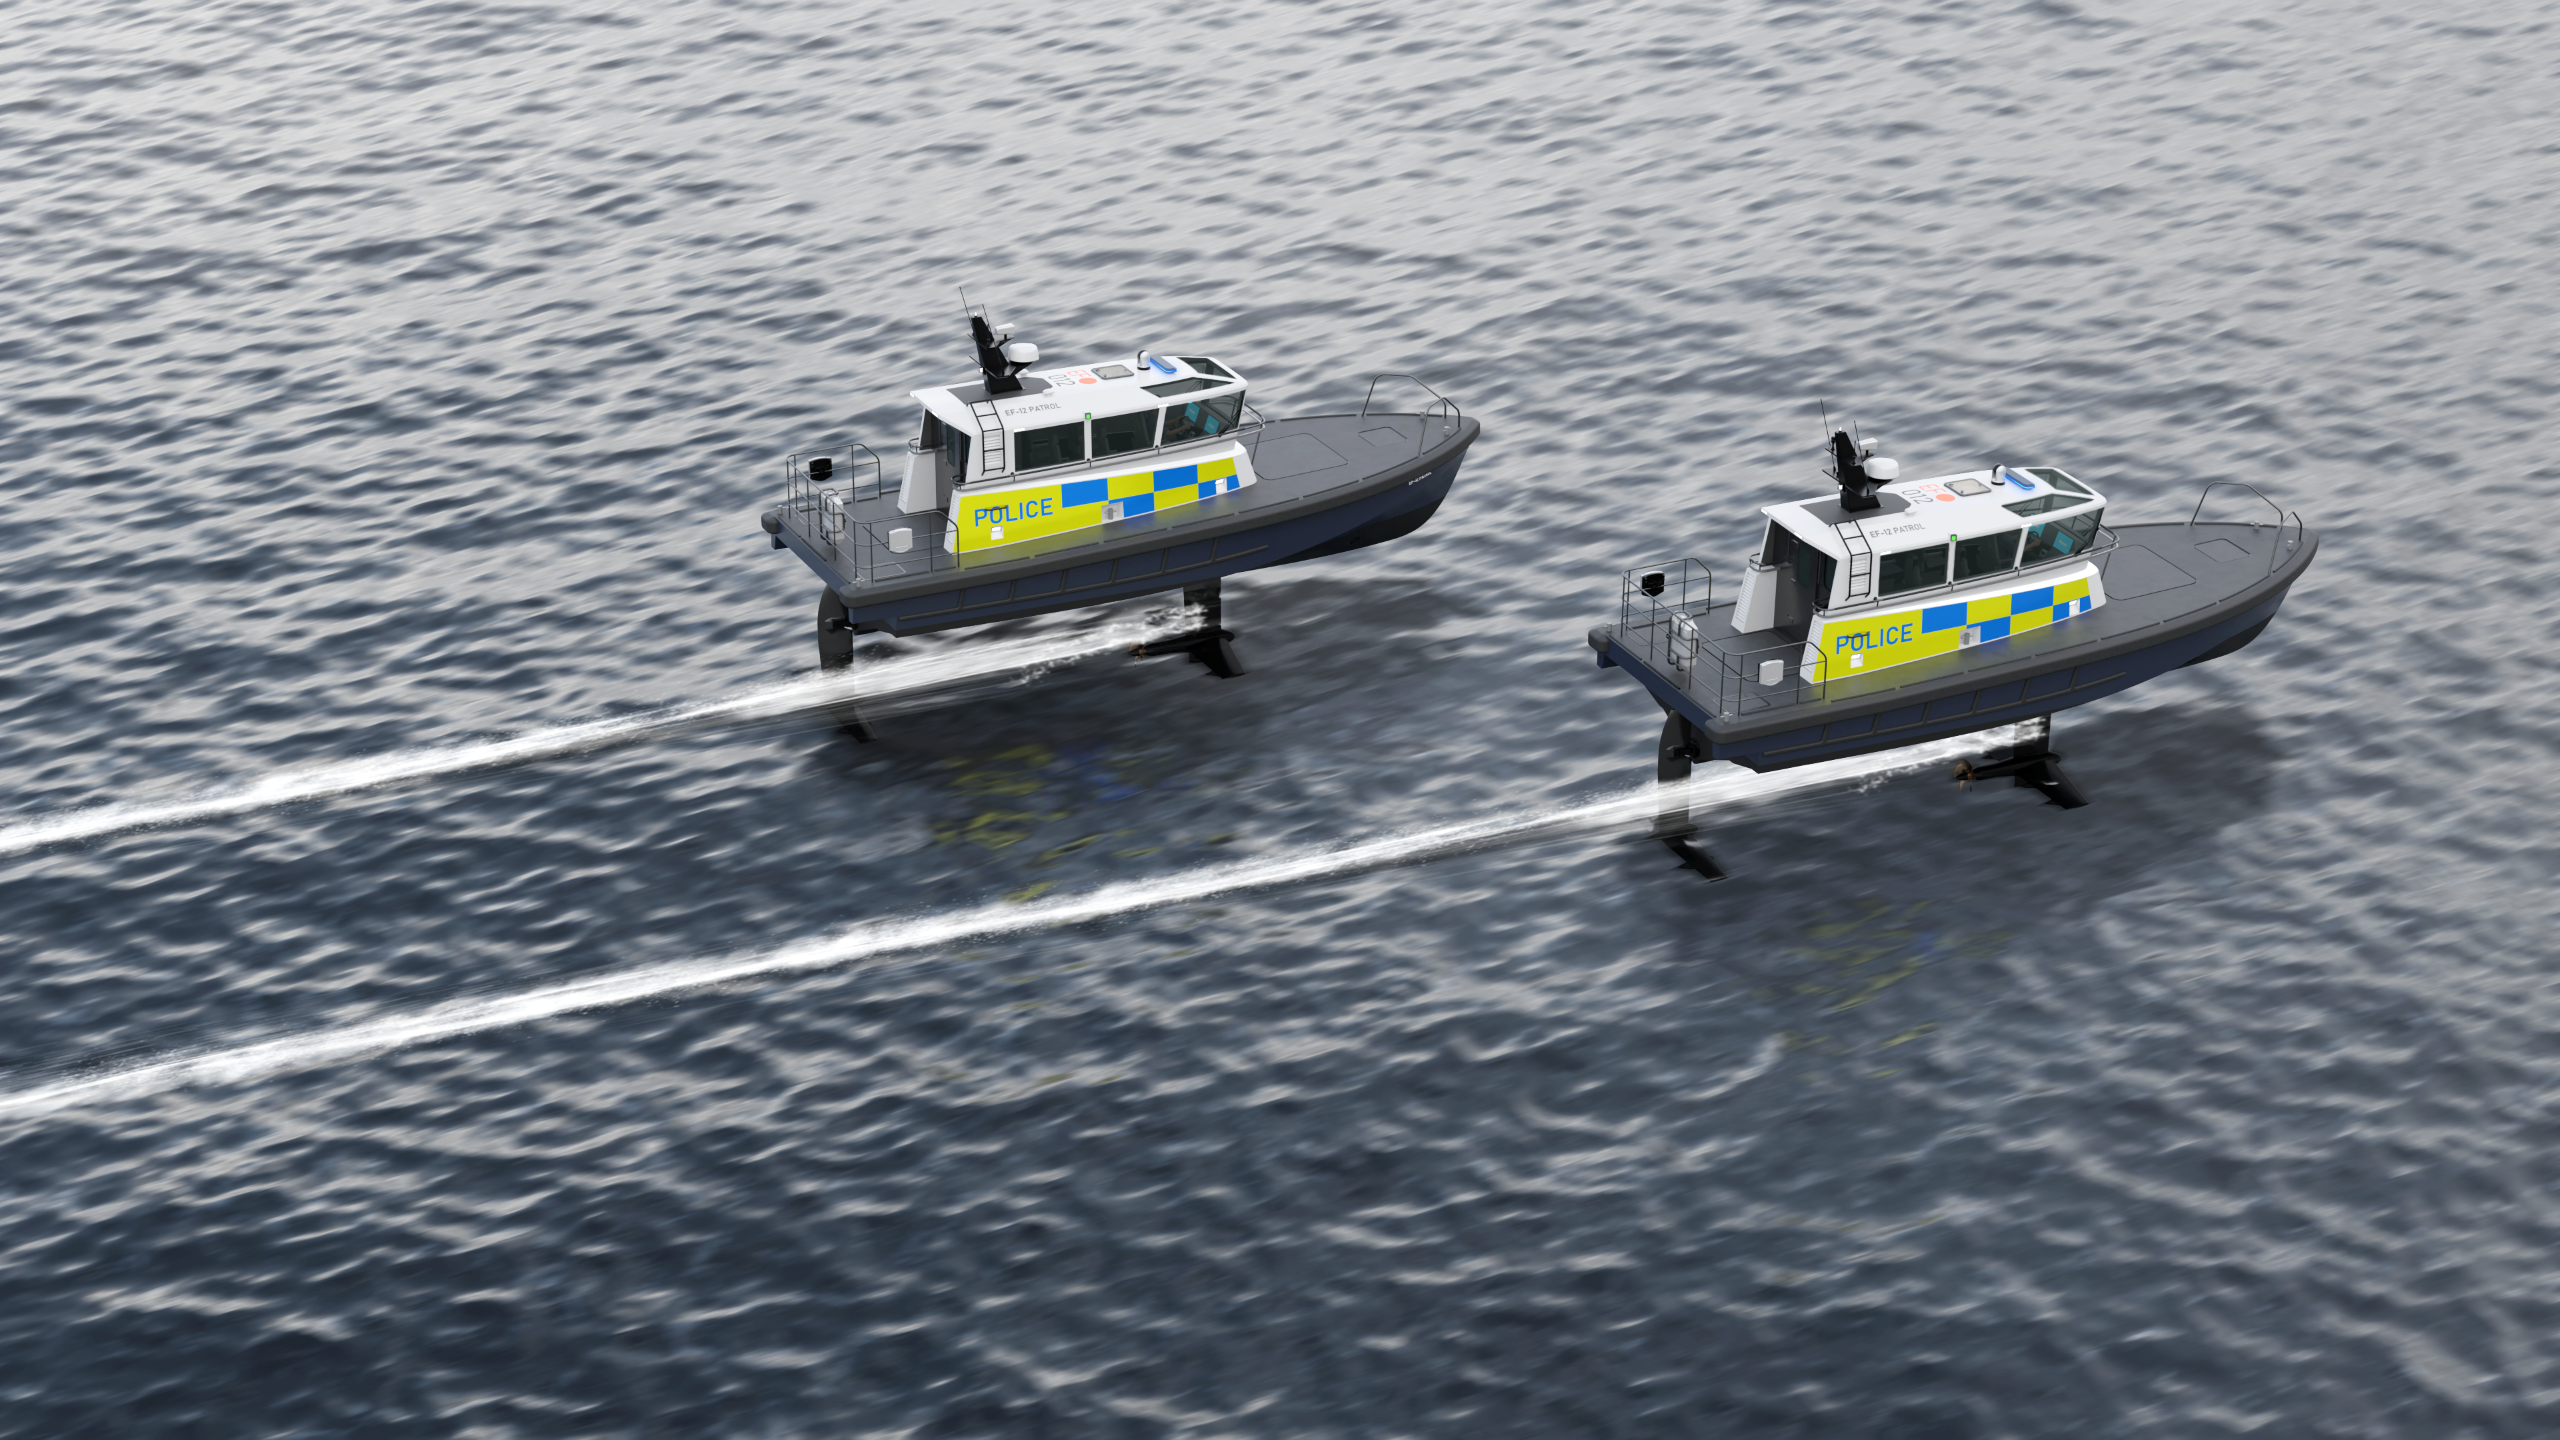 Two Artemis EF-12 Patrol boats foiling away showing the back top of the vessels and the minimal wake behind them